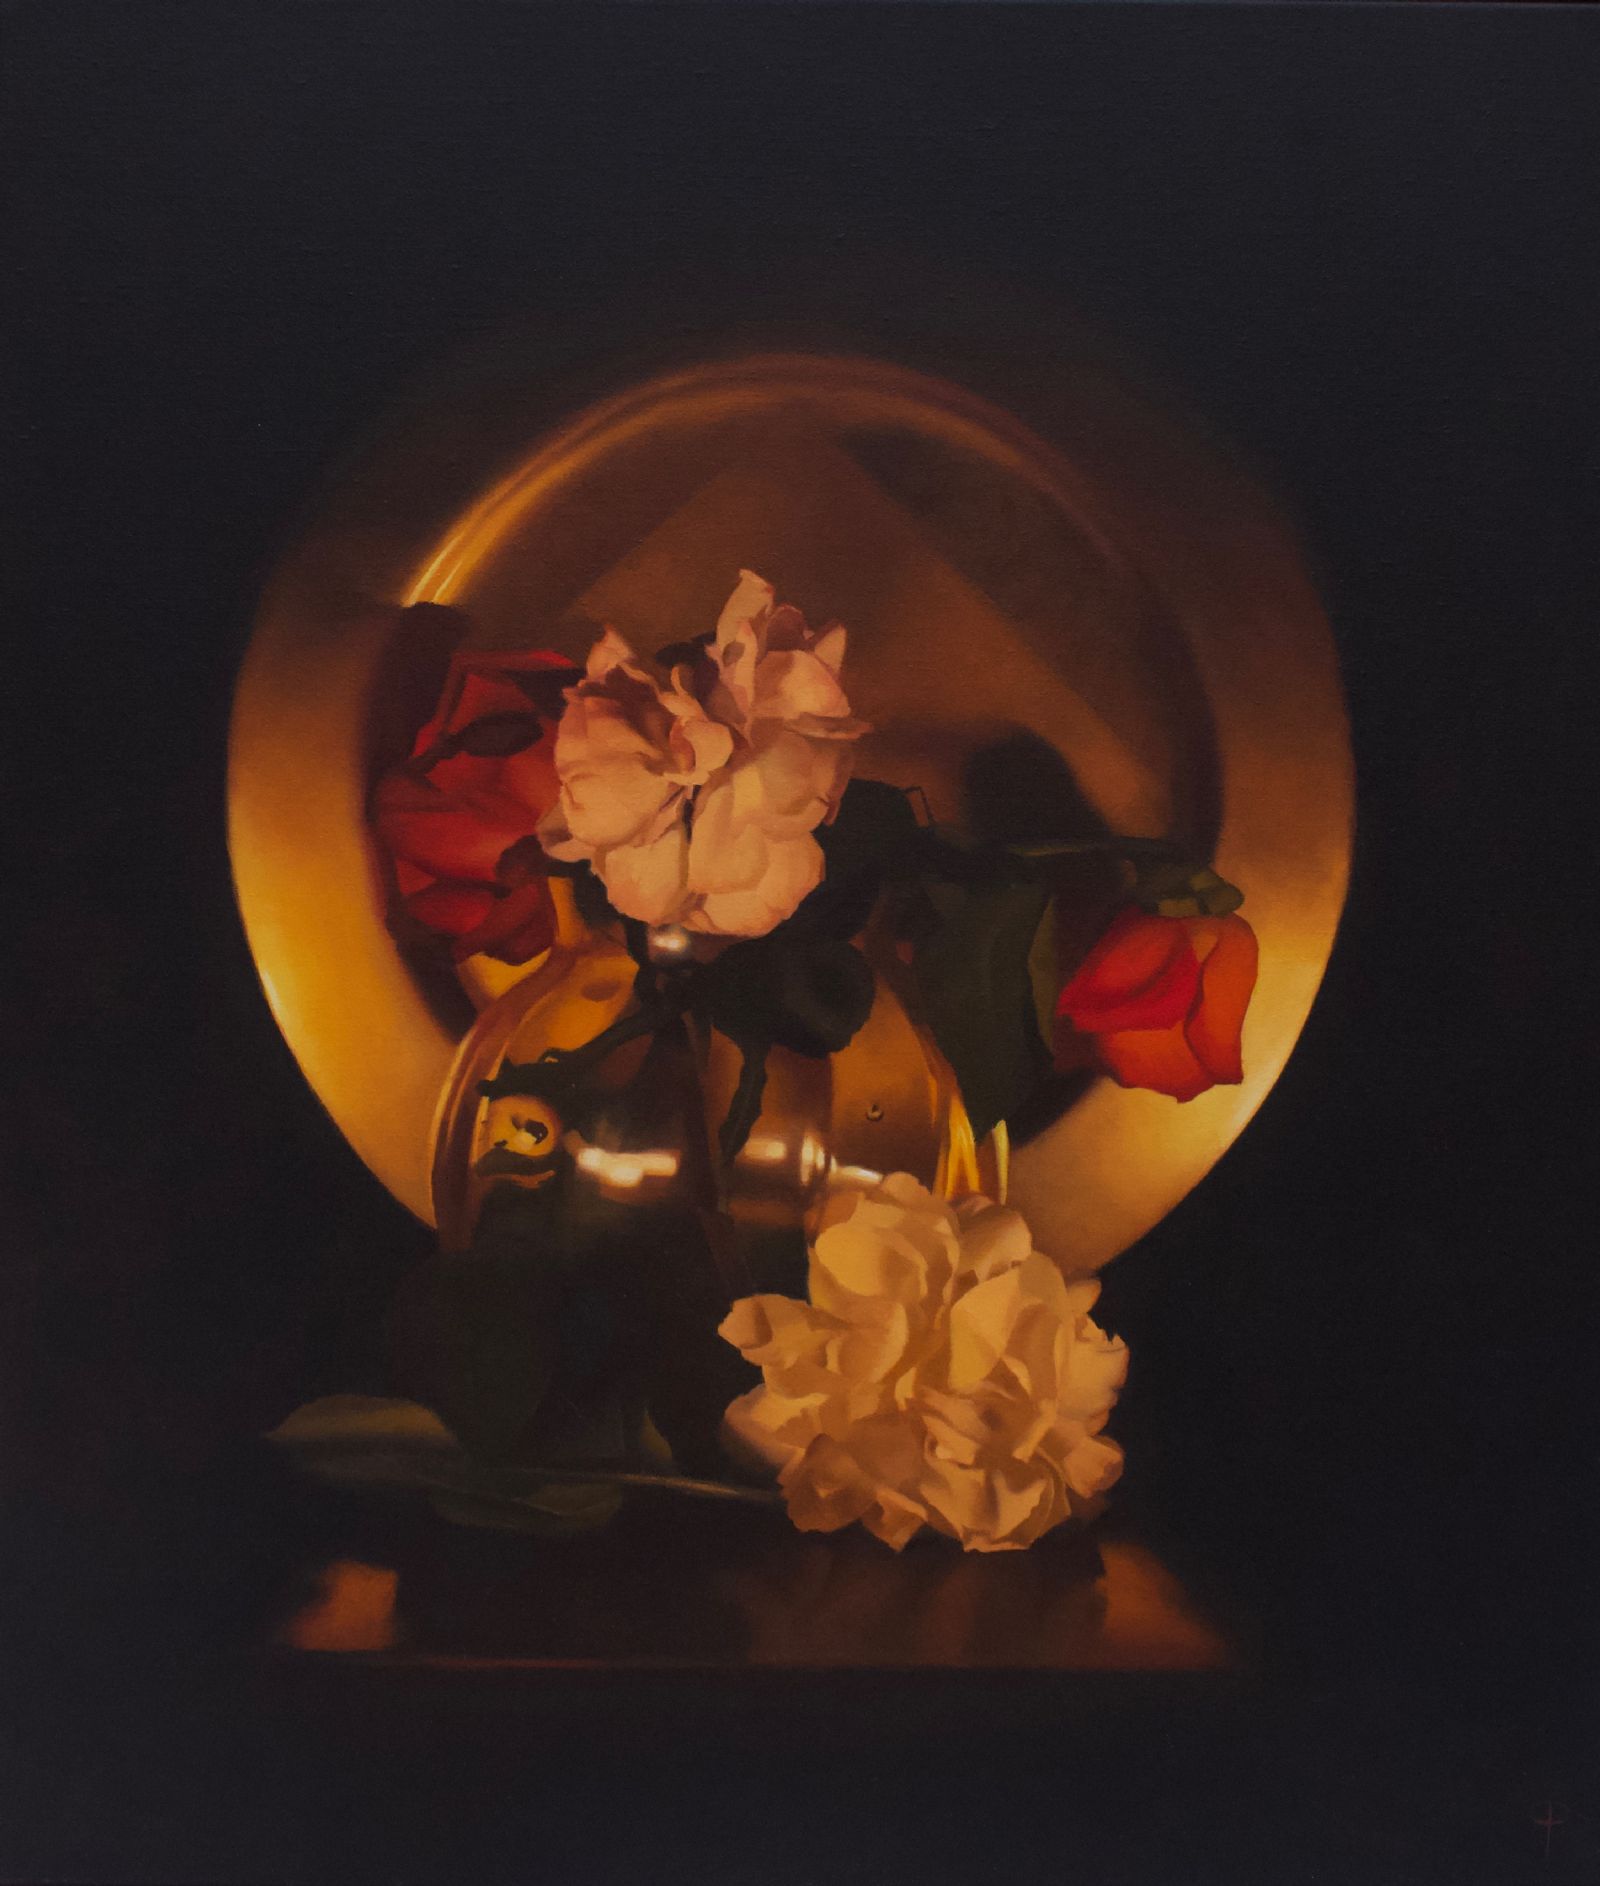 Flowers by Candlelight IV by Chris Polunin